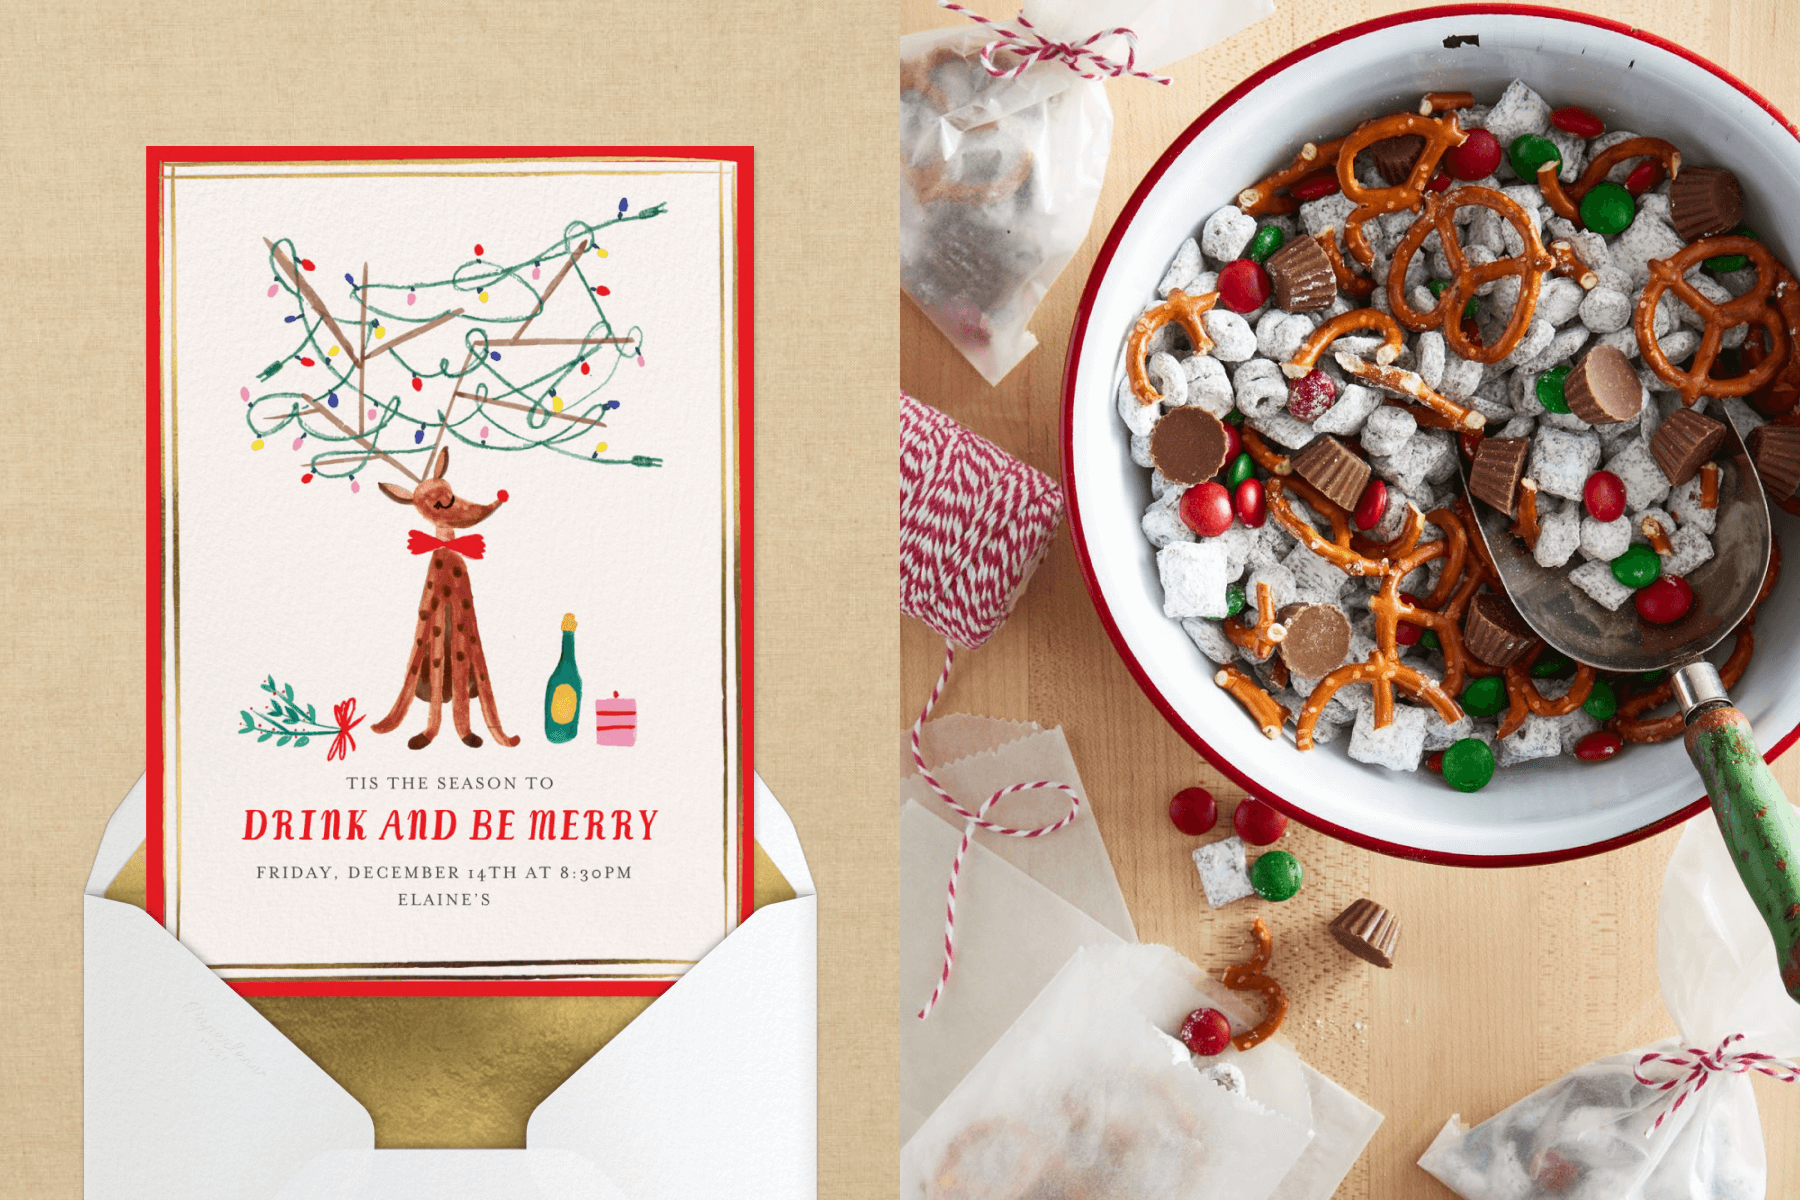 A card with an illustration of a reindeer with Christmas lights tangled in its antlers; a snack mix of pretzels, red and green M&Ms, and mini peanut butter cups.